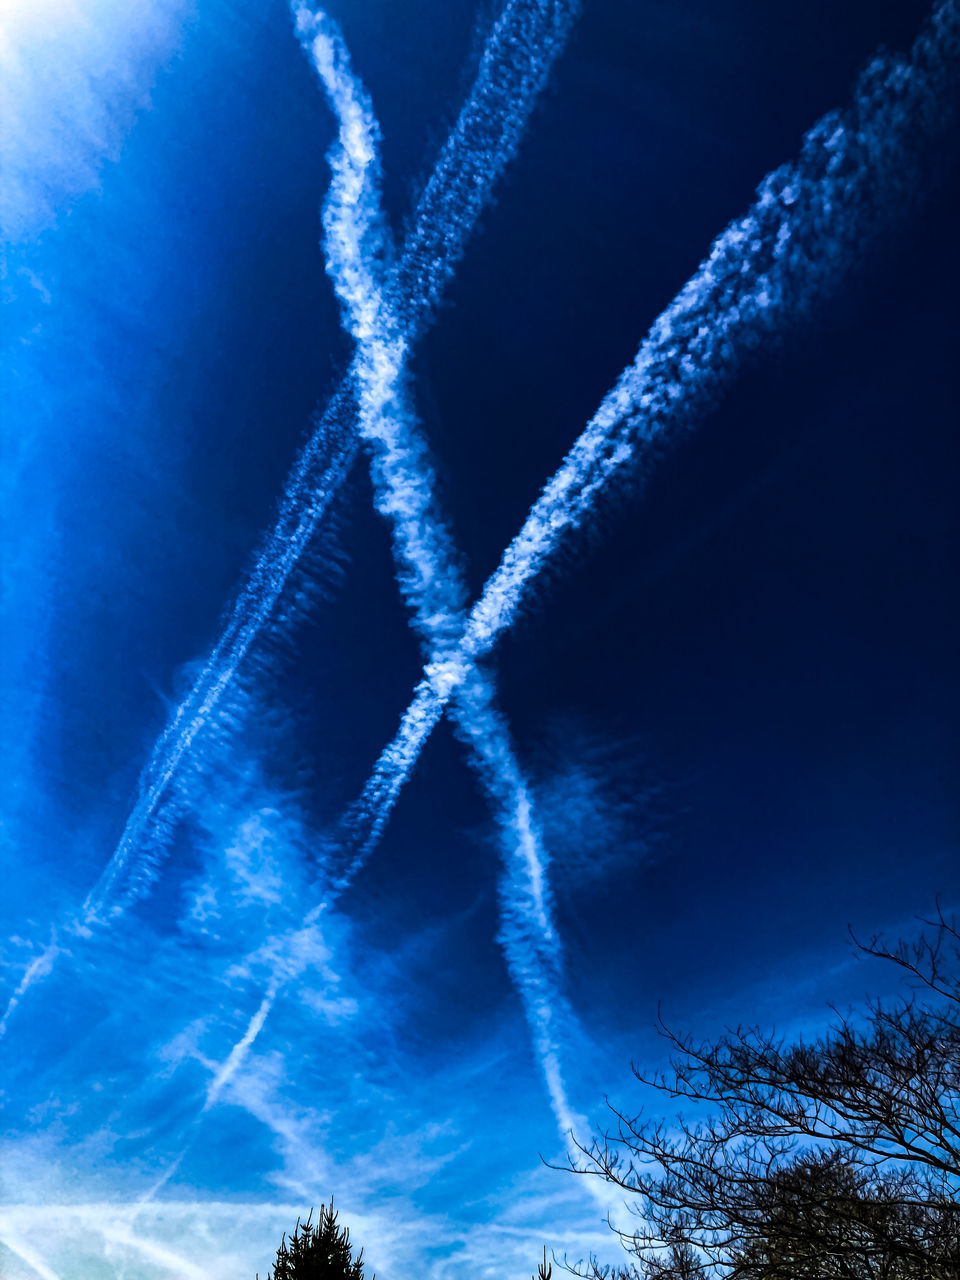 sky, vapor trail, cloud, blue, nature, no people, tree, sunlight, low angle view, plant, wave, air vehicle, outdoors, airplane